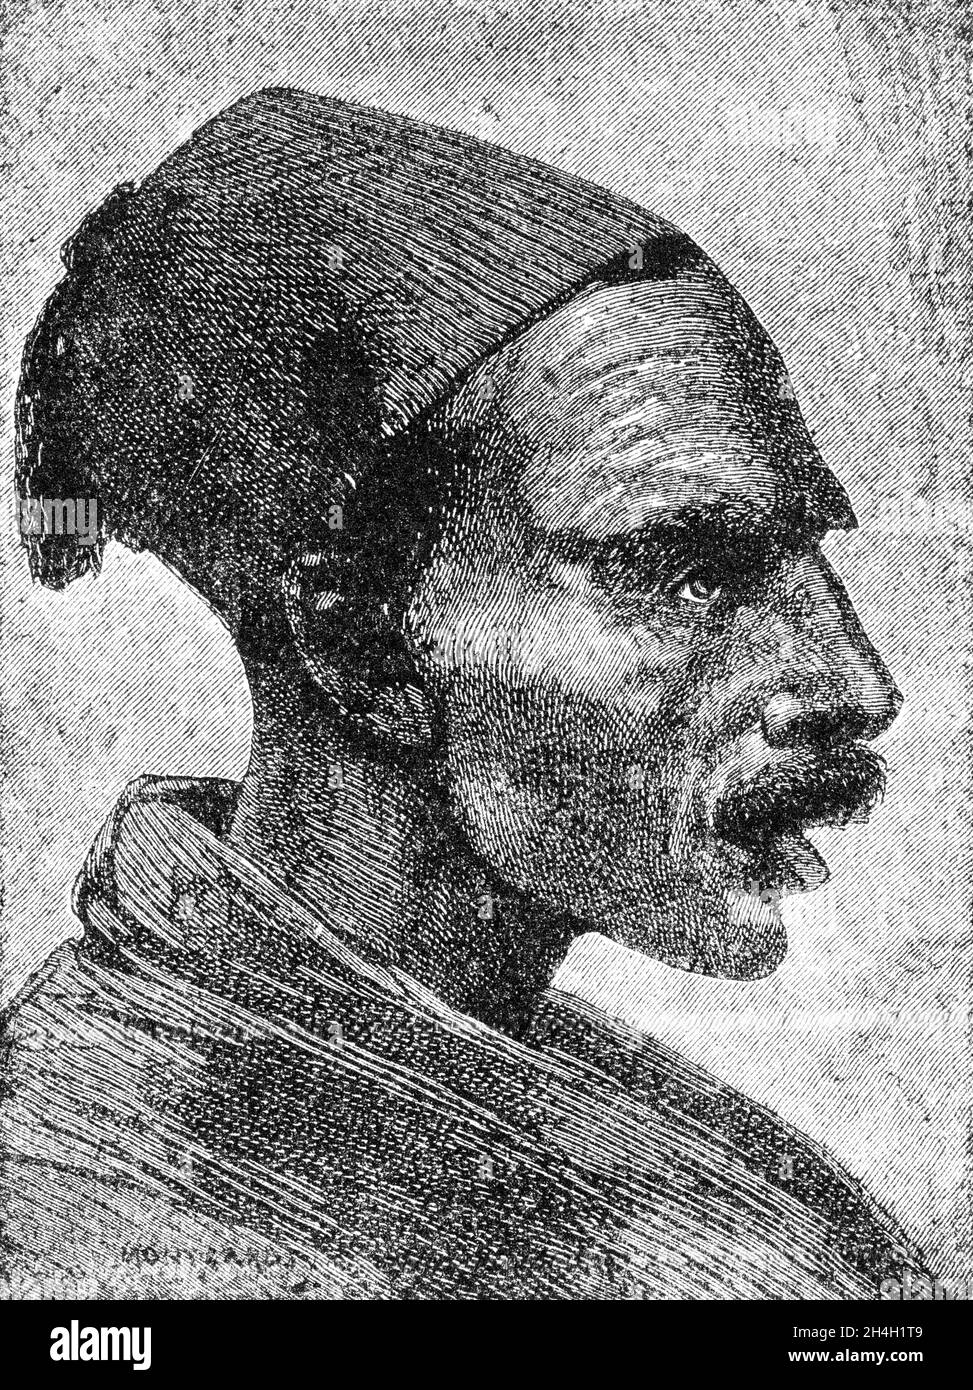 Engraving of Al-Zubayr Rahma Mansur Pasha (1830 – 1913), also known as Sebehr Rahma or Rahama Zobeir, a slave trader in the late 19th century and nemesis of General Gordon at Khartoum. He later became a pasha and Sudanese governor. Stock Photo